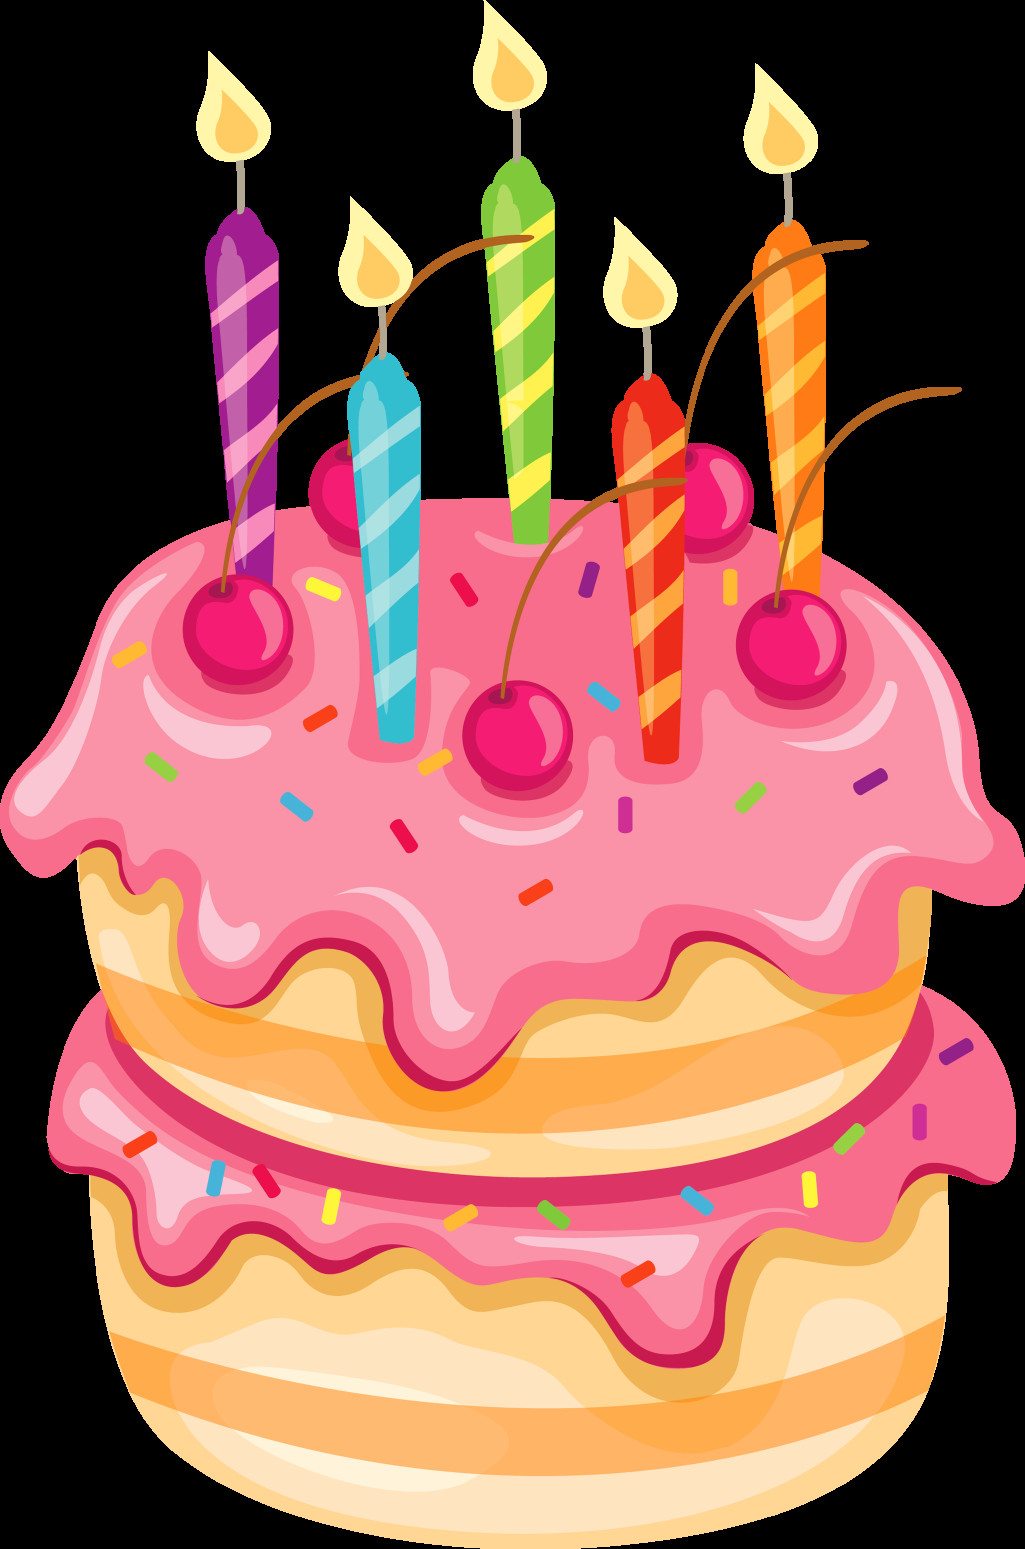 Birthday Cake Clip Art
 Pink Cake with Candles PNG Clipart